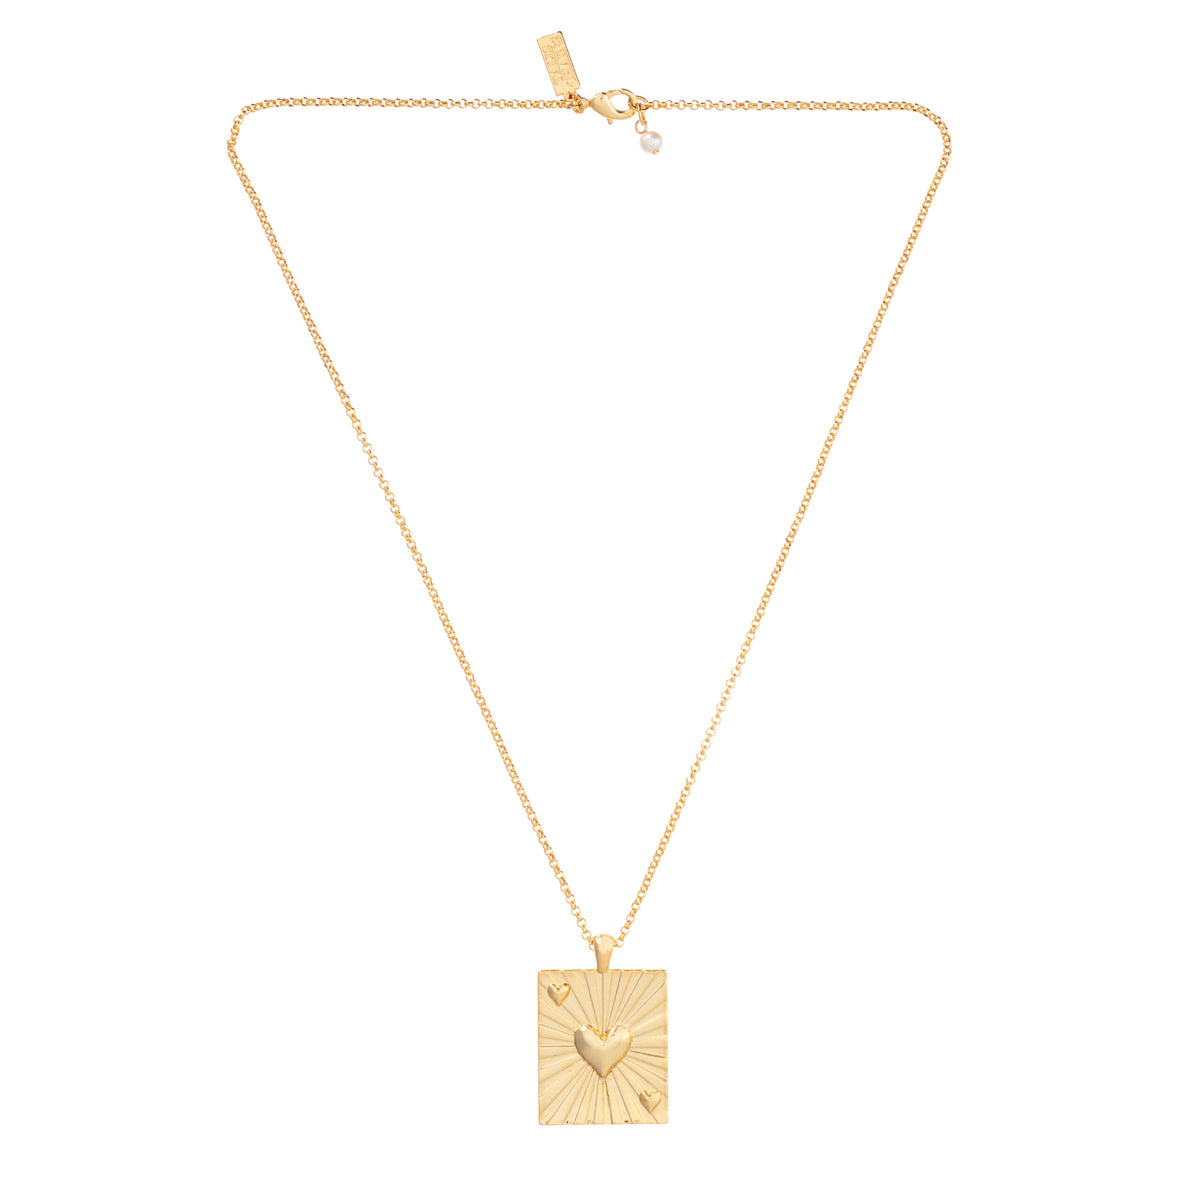 Gold necklace with rectangular gold pendant with embossed heart